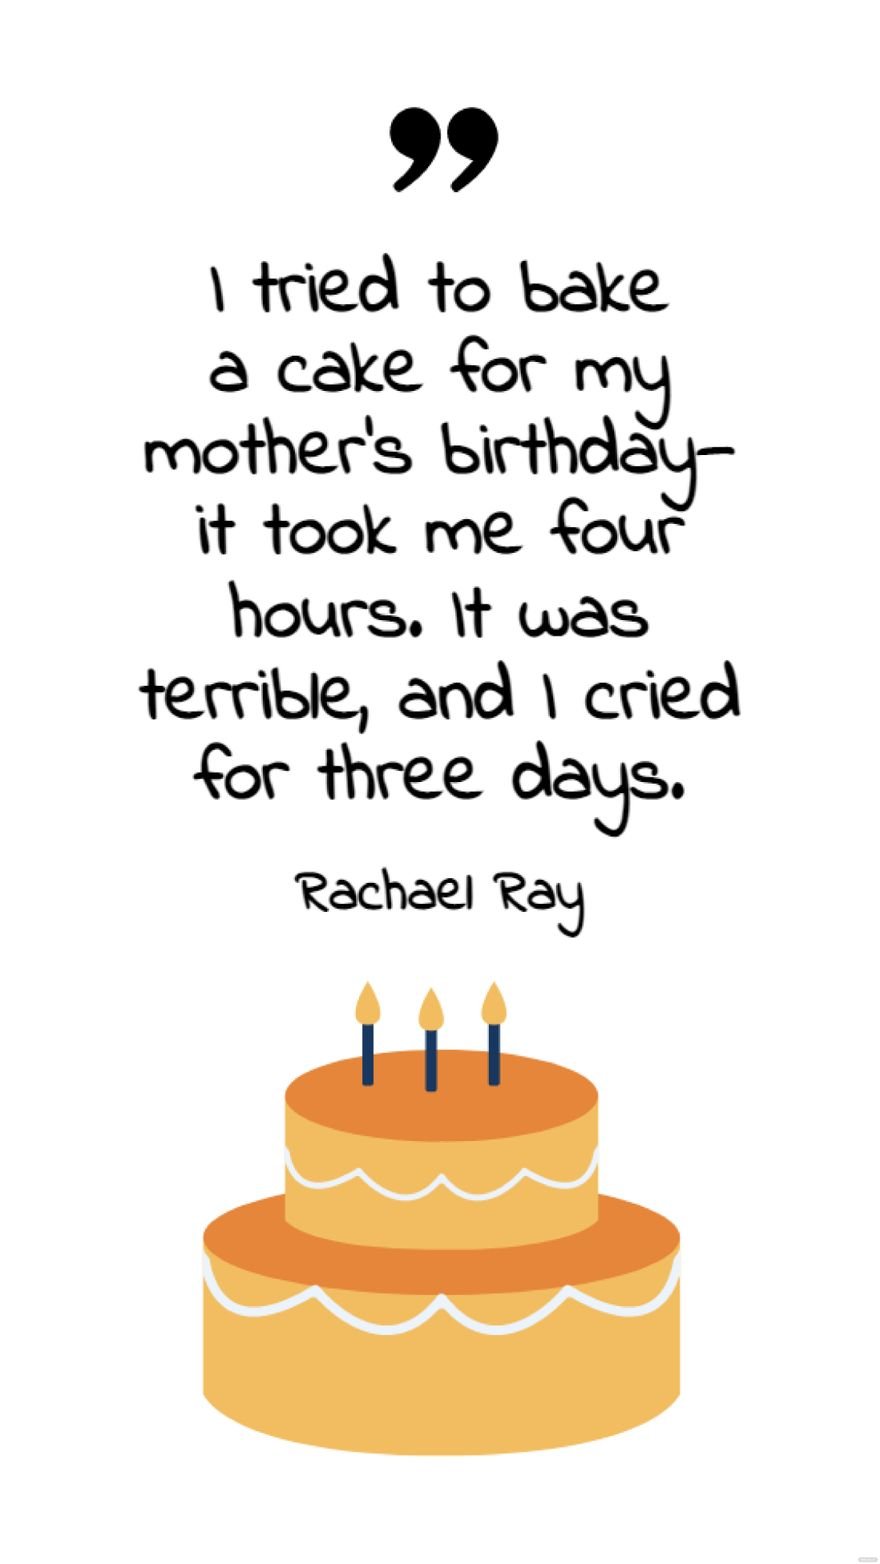 Rachael Ray - I tried to bake a cake for my mother's birthday - it took me four hours. It was terrible, and I cried for three days.